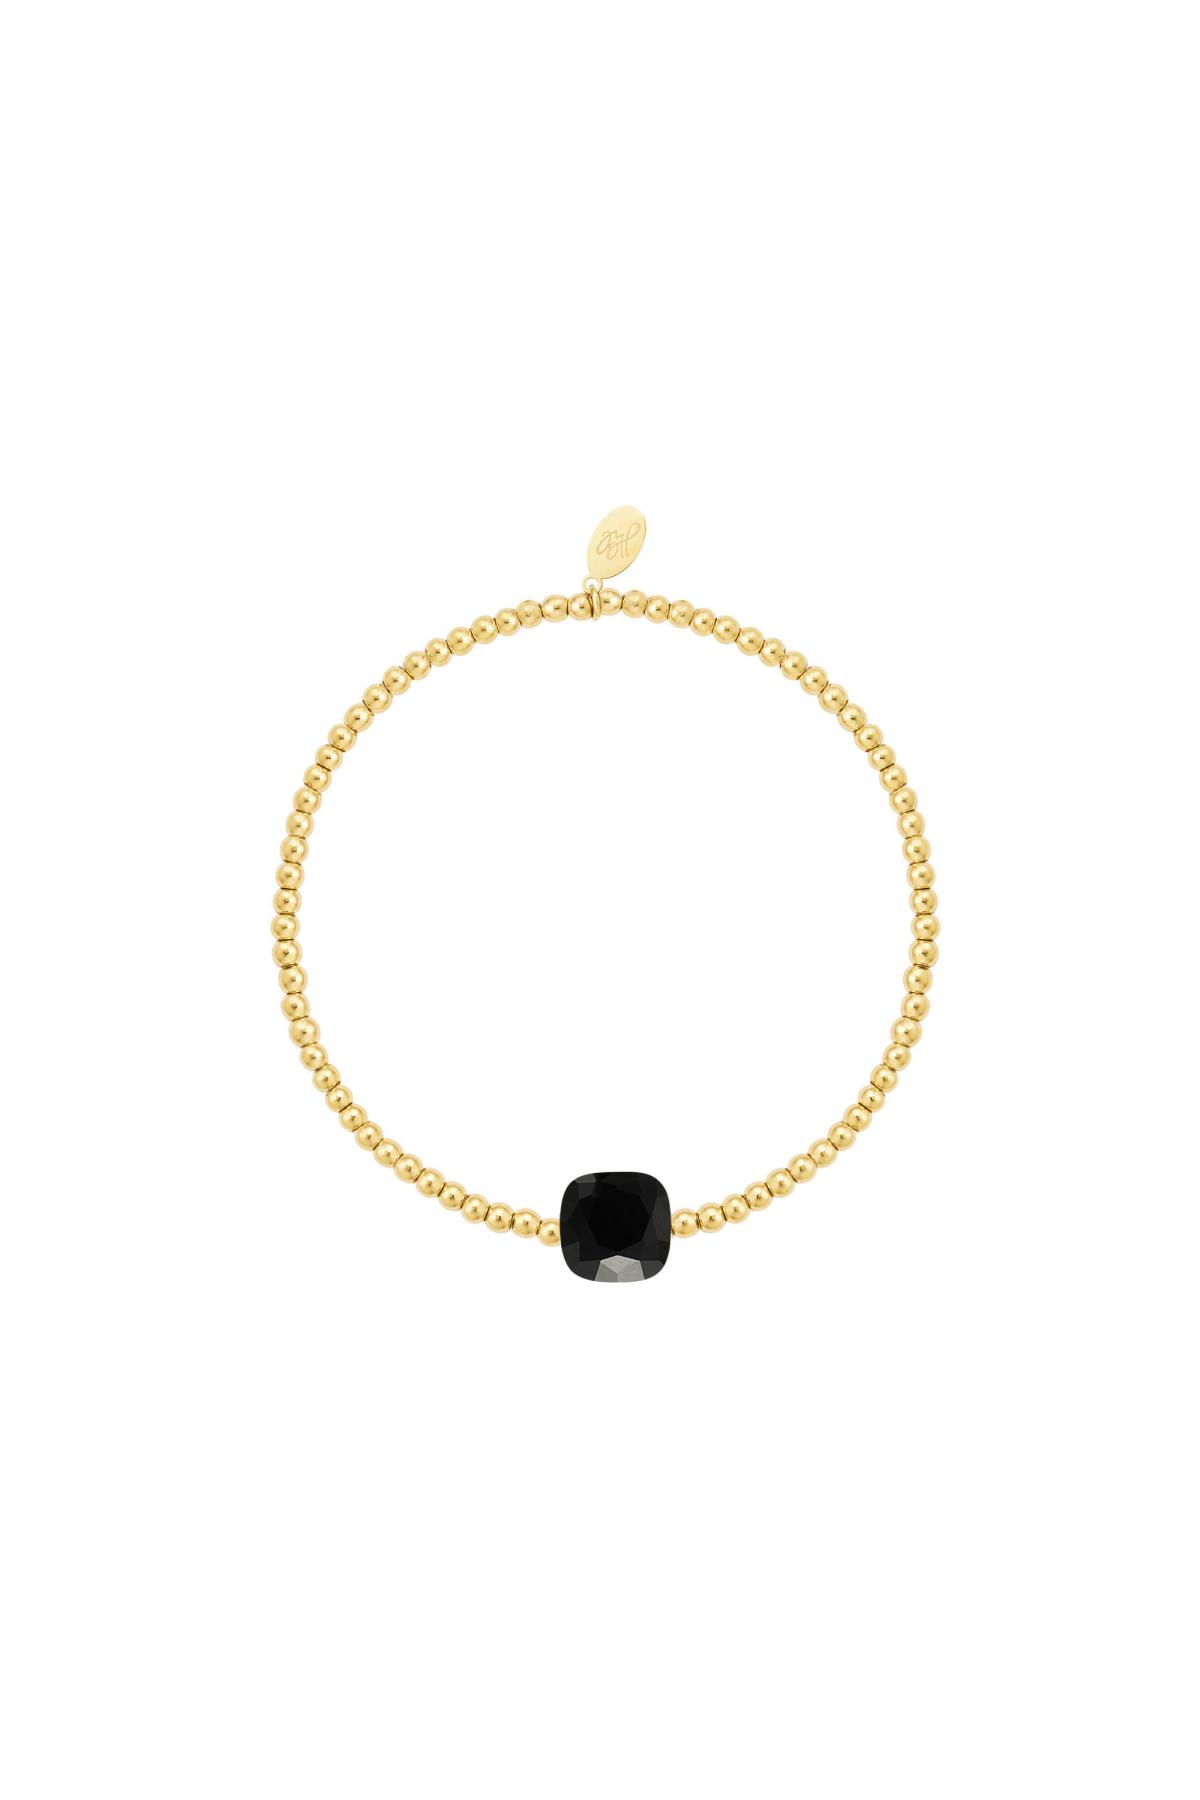 Bracelet beads with large stone - Natural stone collection Black &amp; Gold Stainless Steel